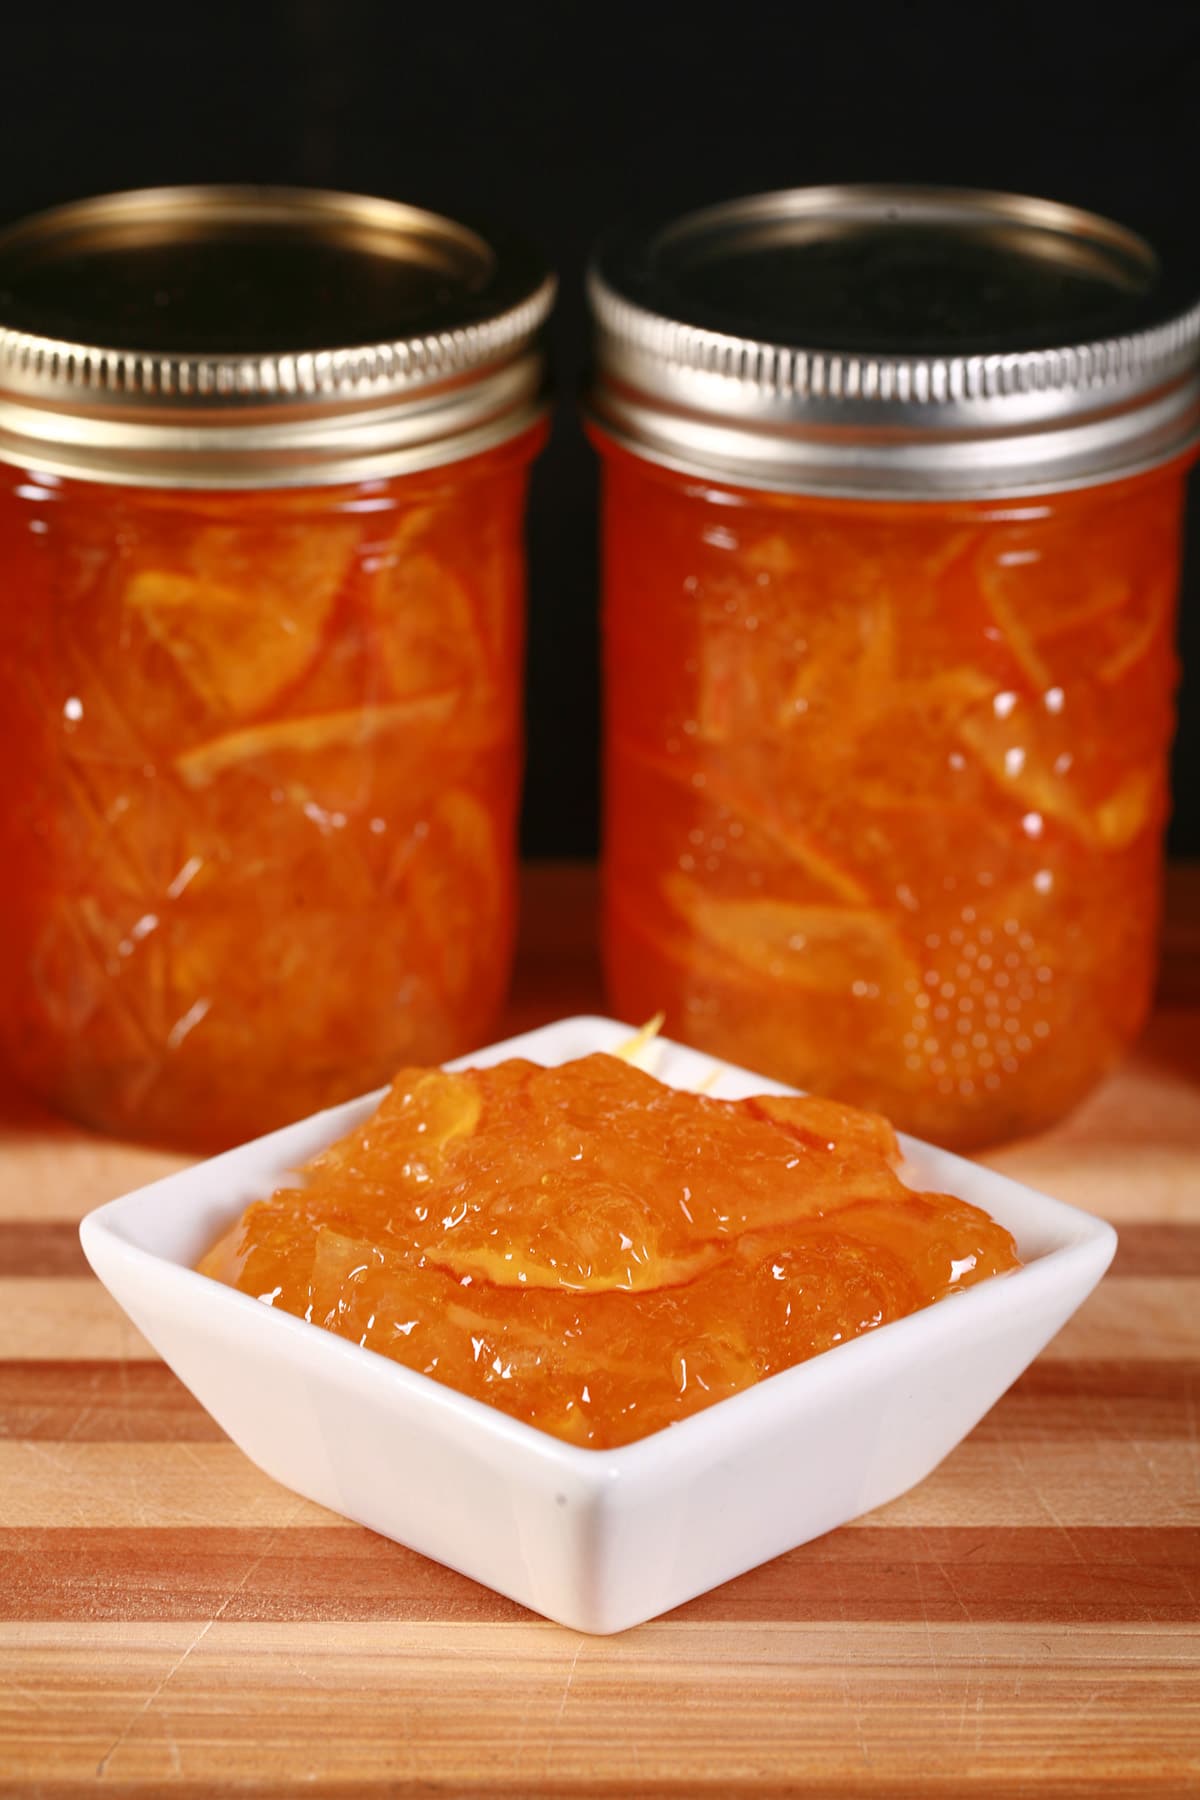 A row of small jars of clementine marmalade, with a small dish of marmalade in front.